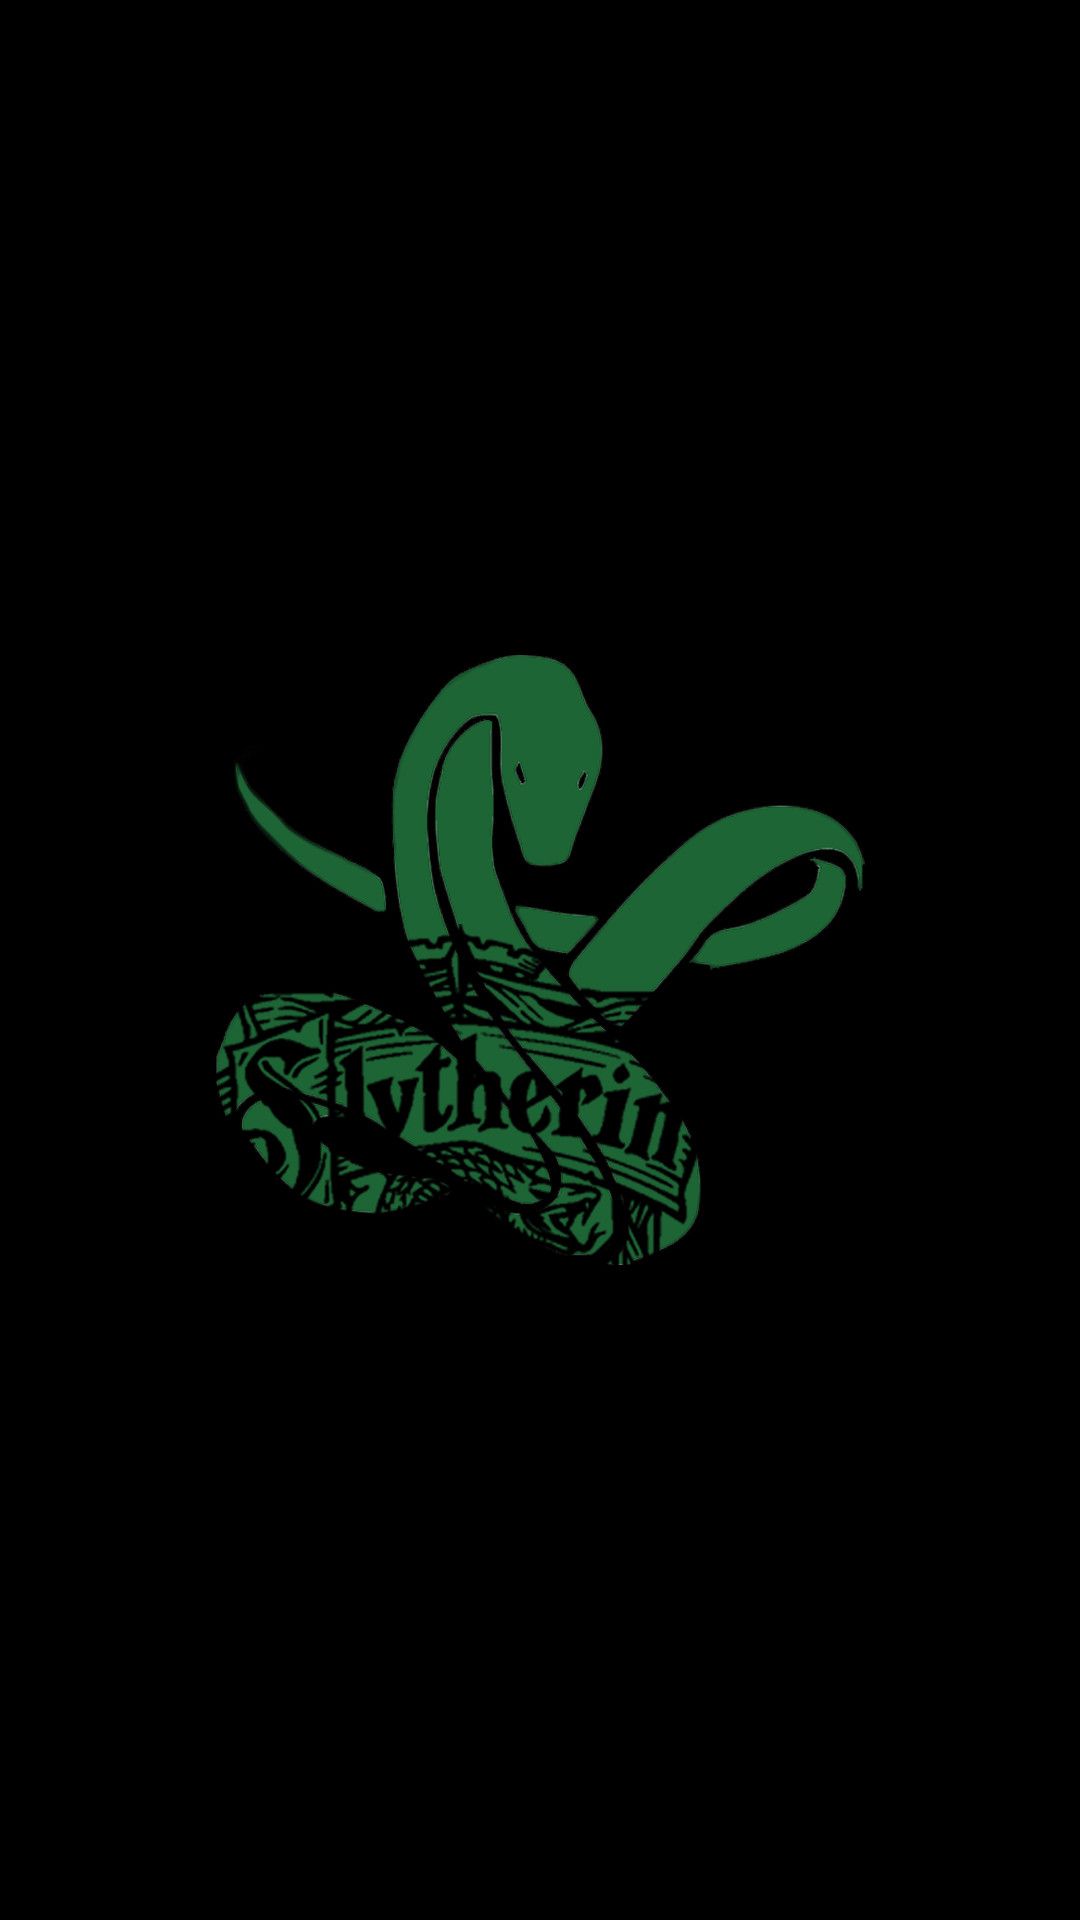 Slytherin iPhone Wallpaper